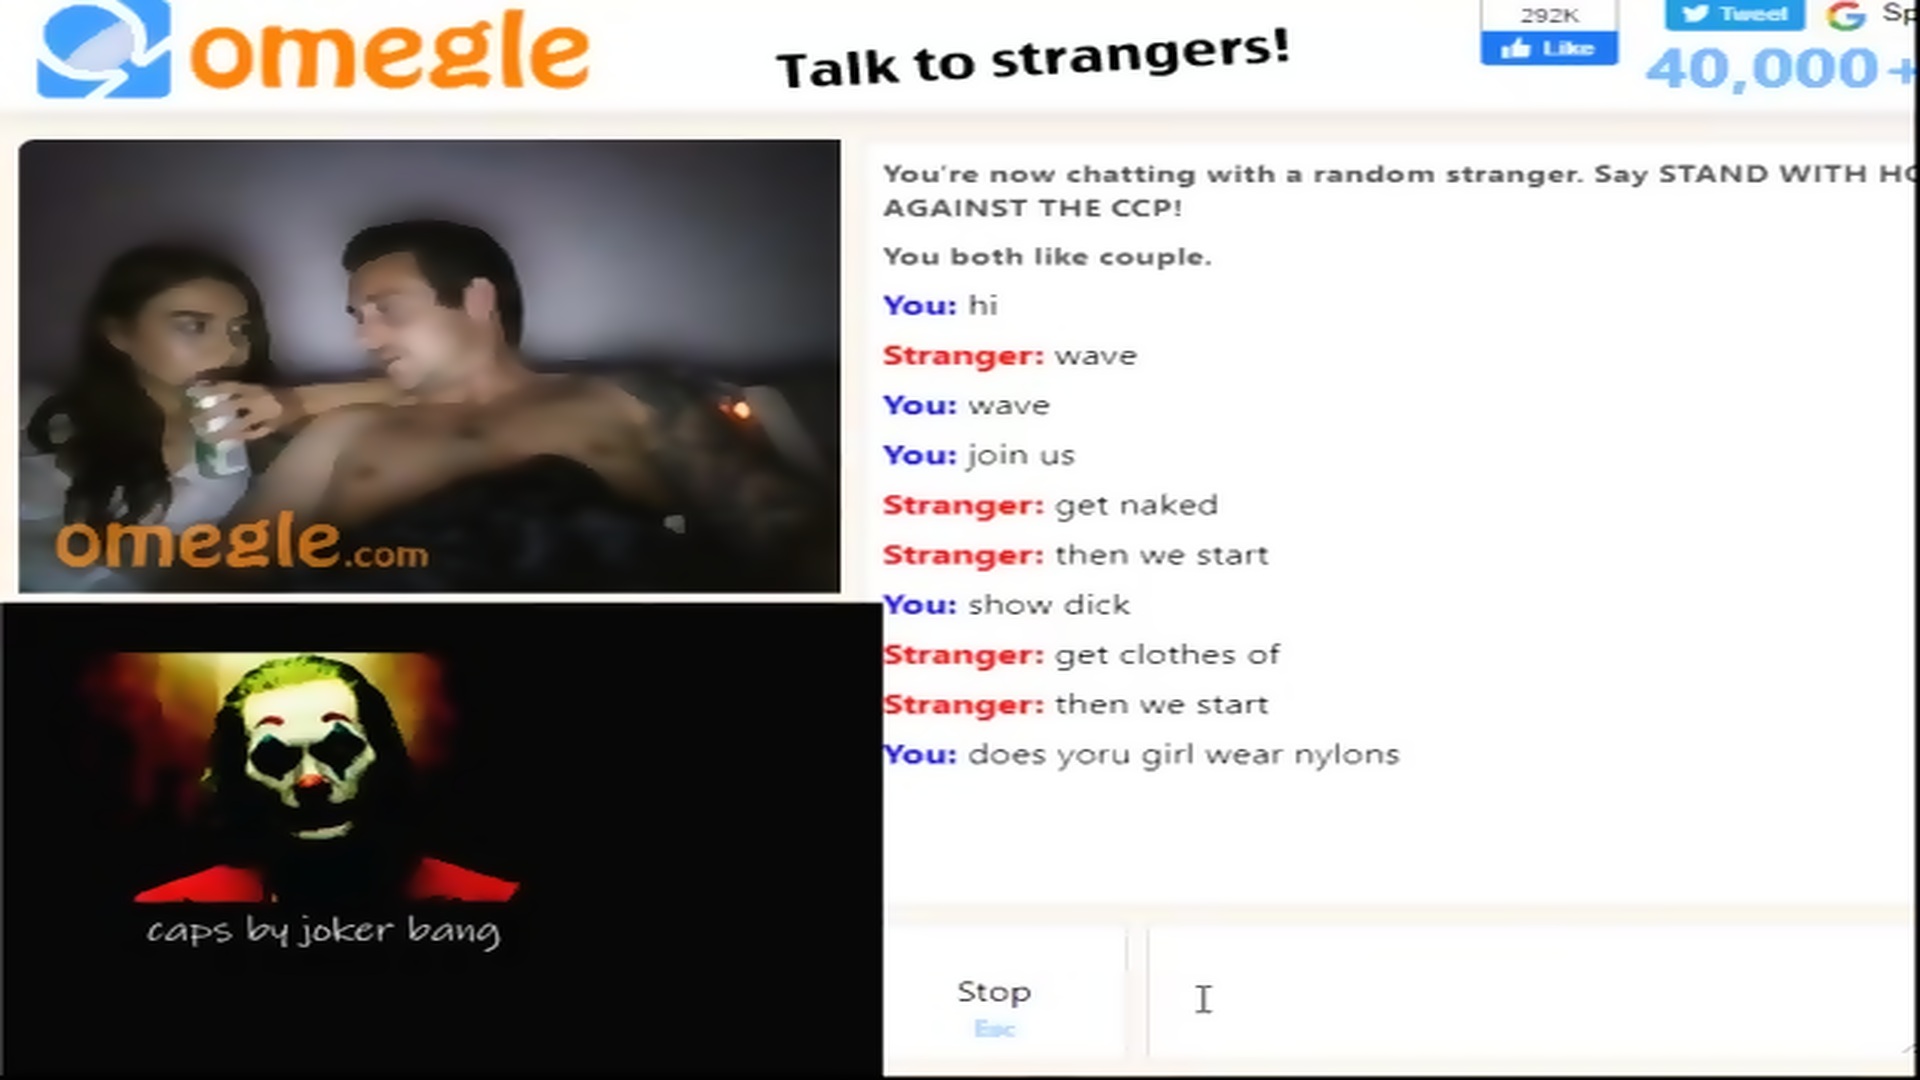 Omegle common interests